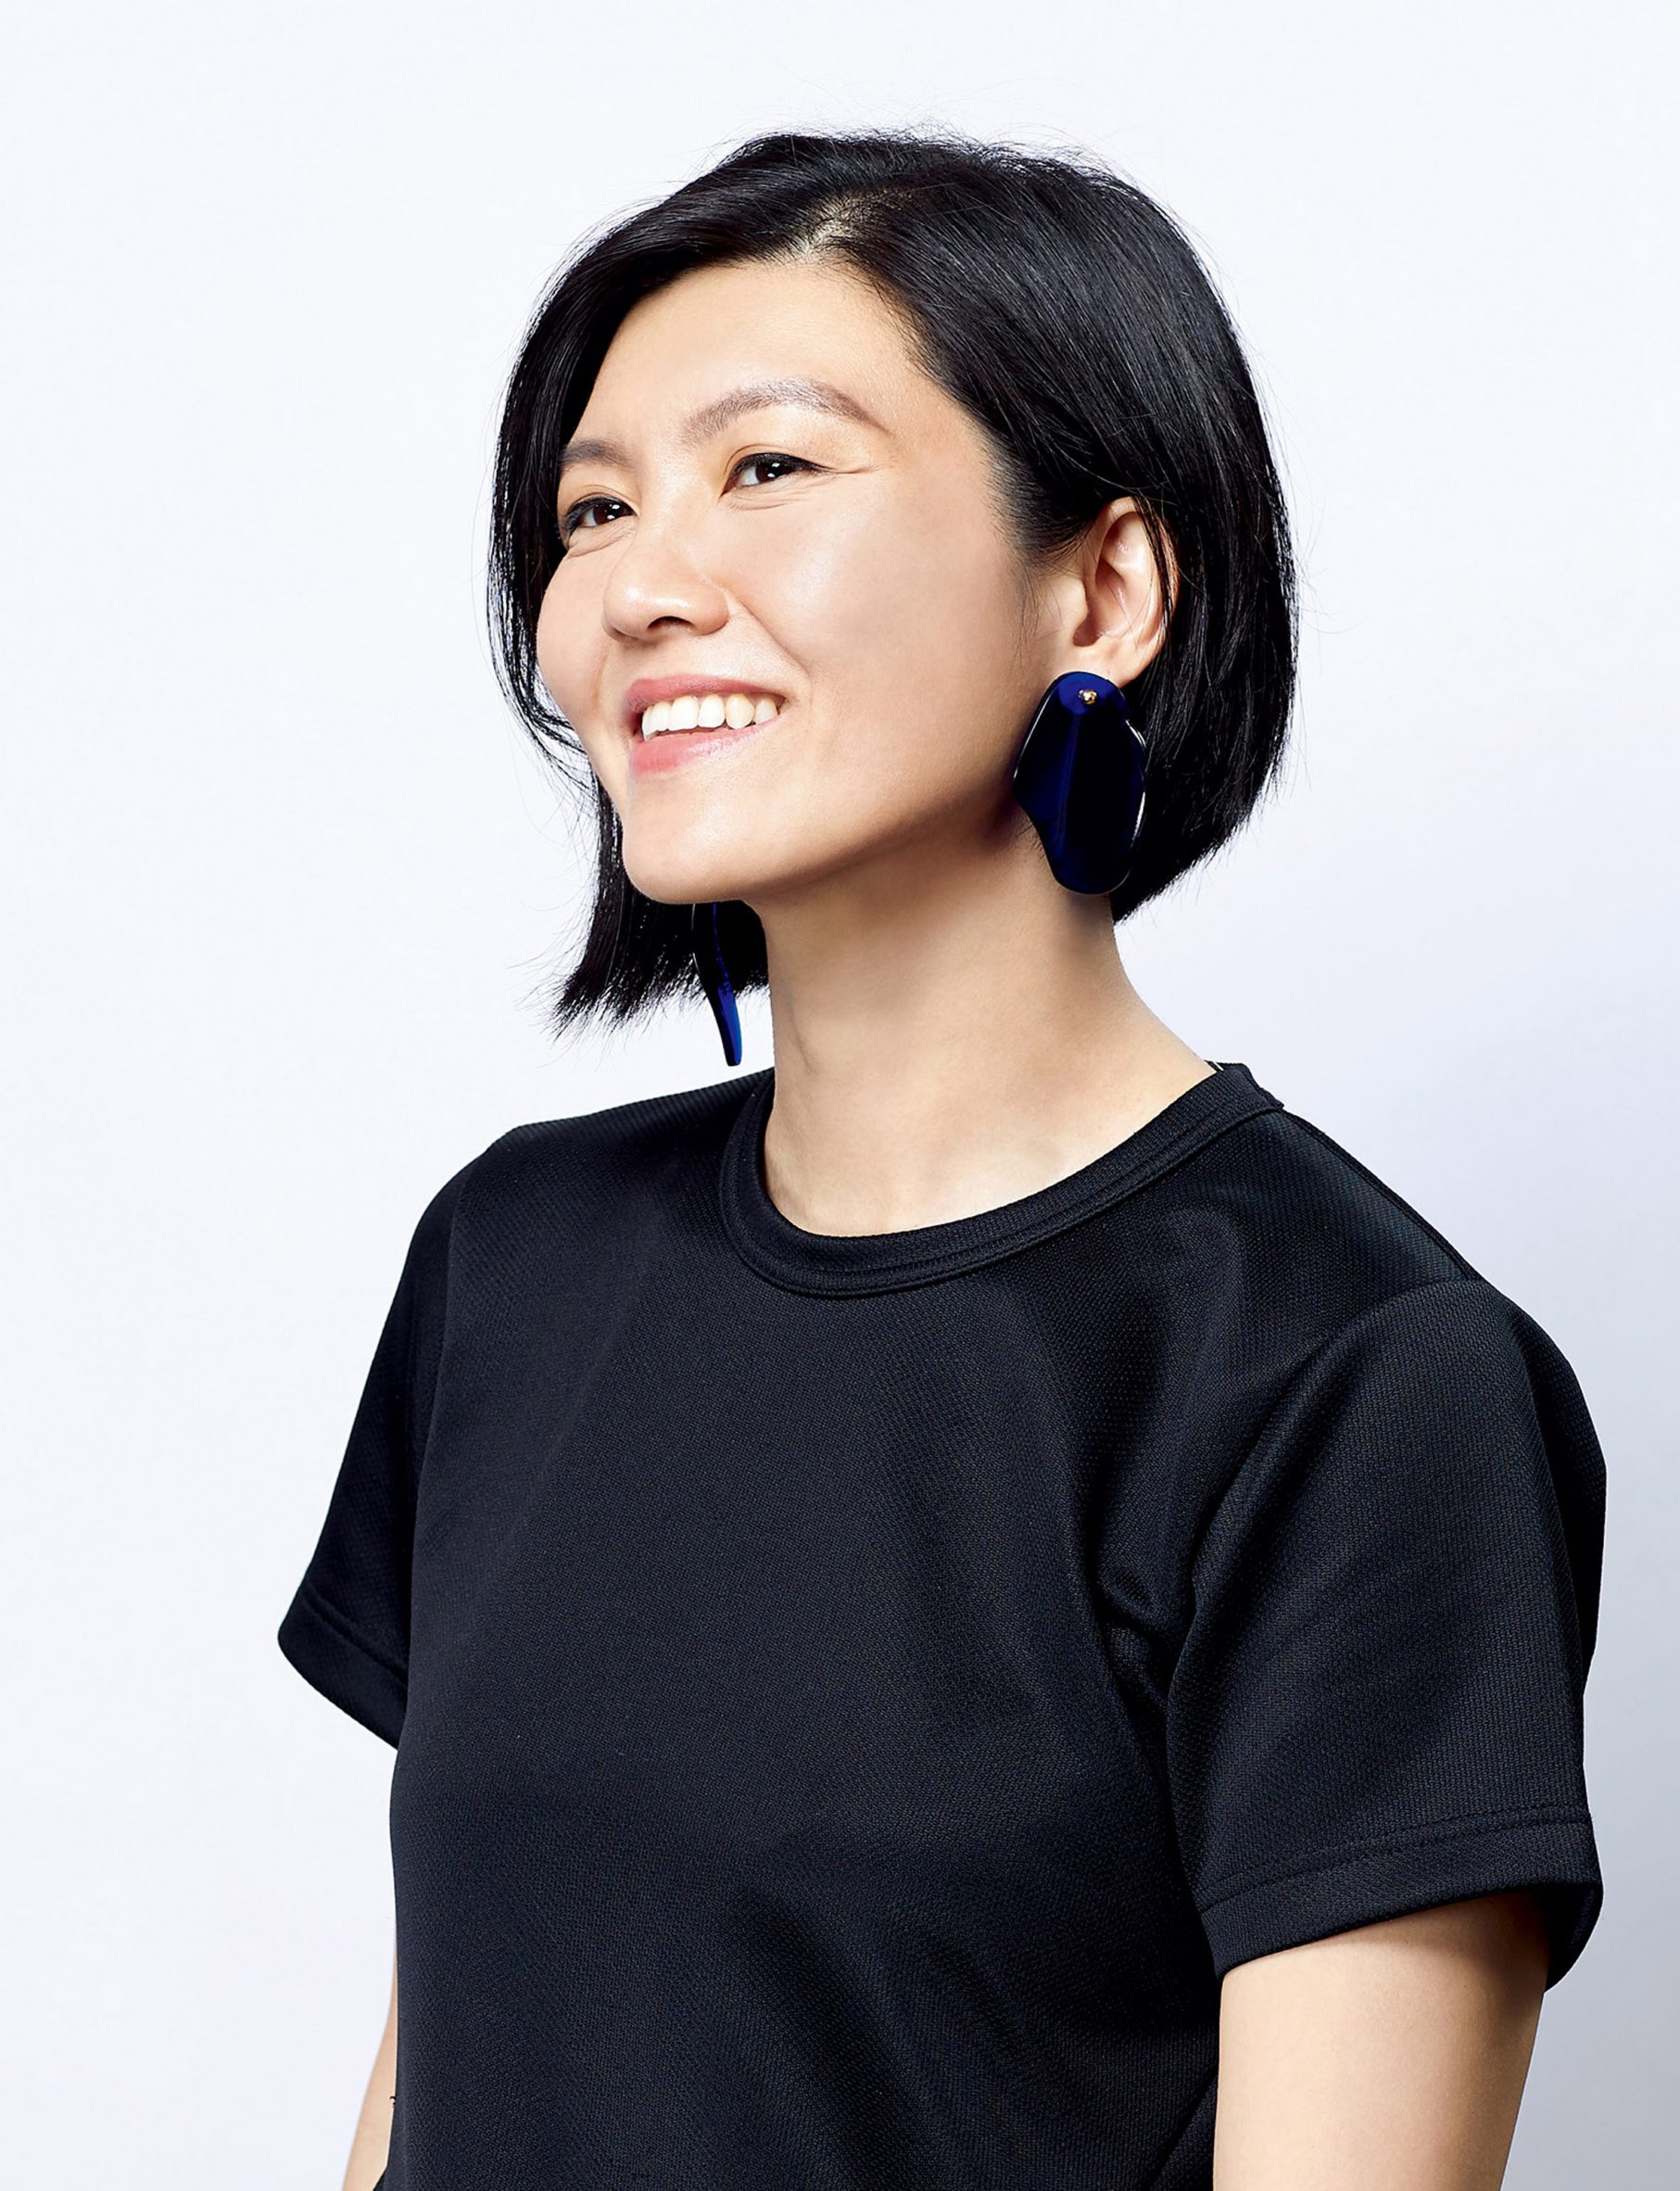 Betty Ng - Founder & Design Director of Collective